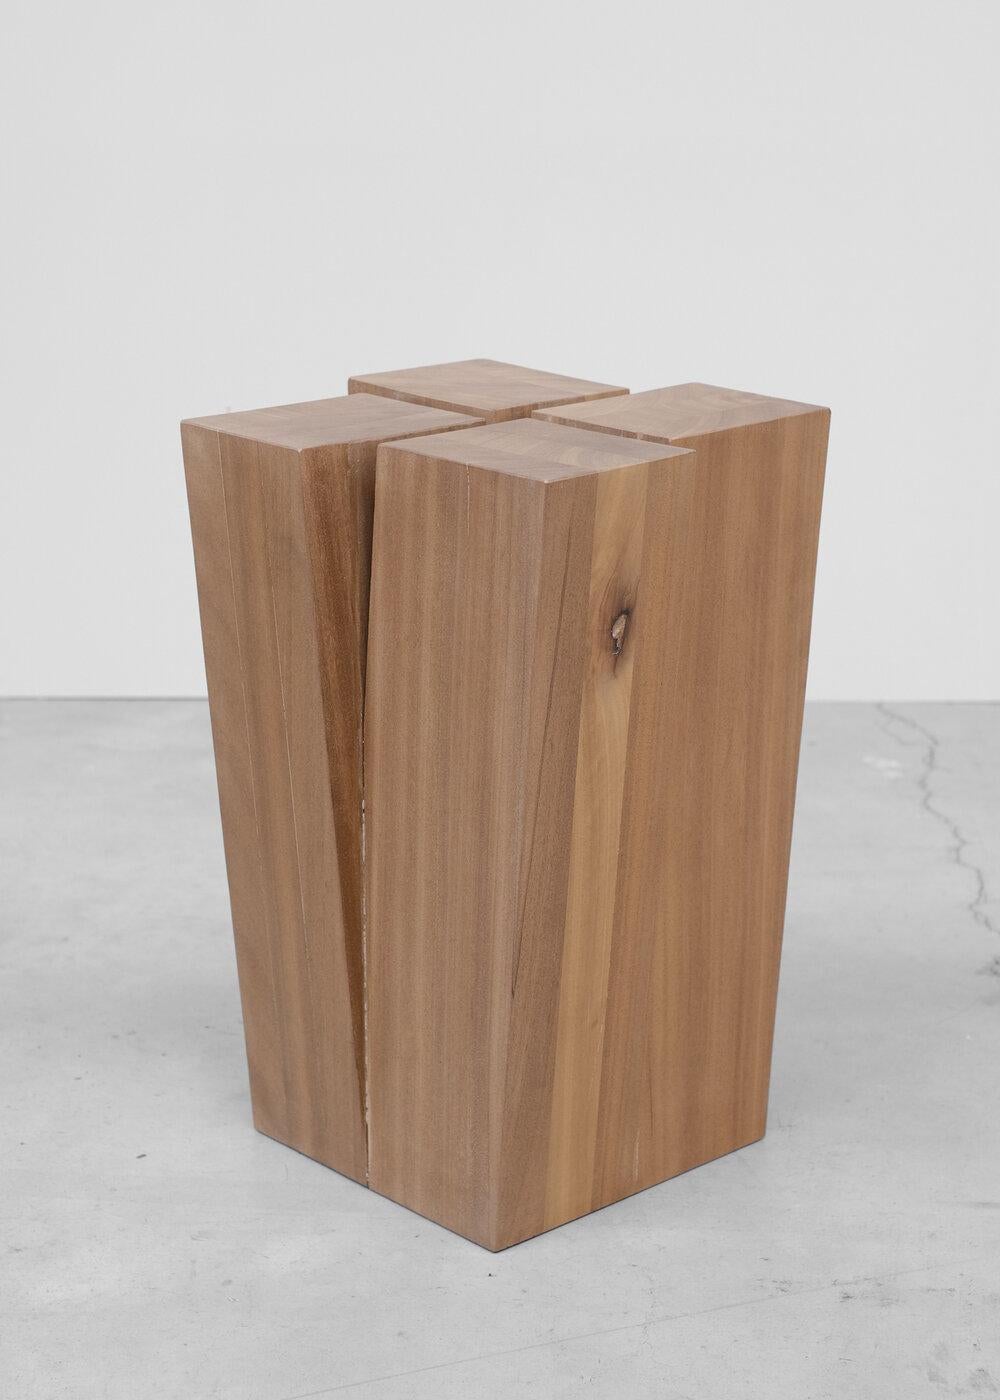 Contemporary stool in walnut, four legs naturel by Arno Declercq

Dimensions: D32 x W32 x H50 cm
Materials: African Walnut

Made by hand, in Belgium.

Arno Declercq
Belgian designer and art dealer who makes bespoke objects with passion for